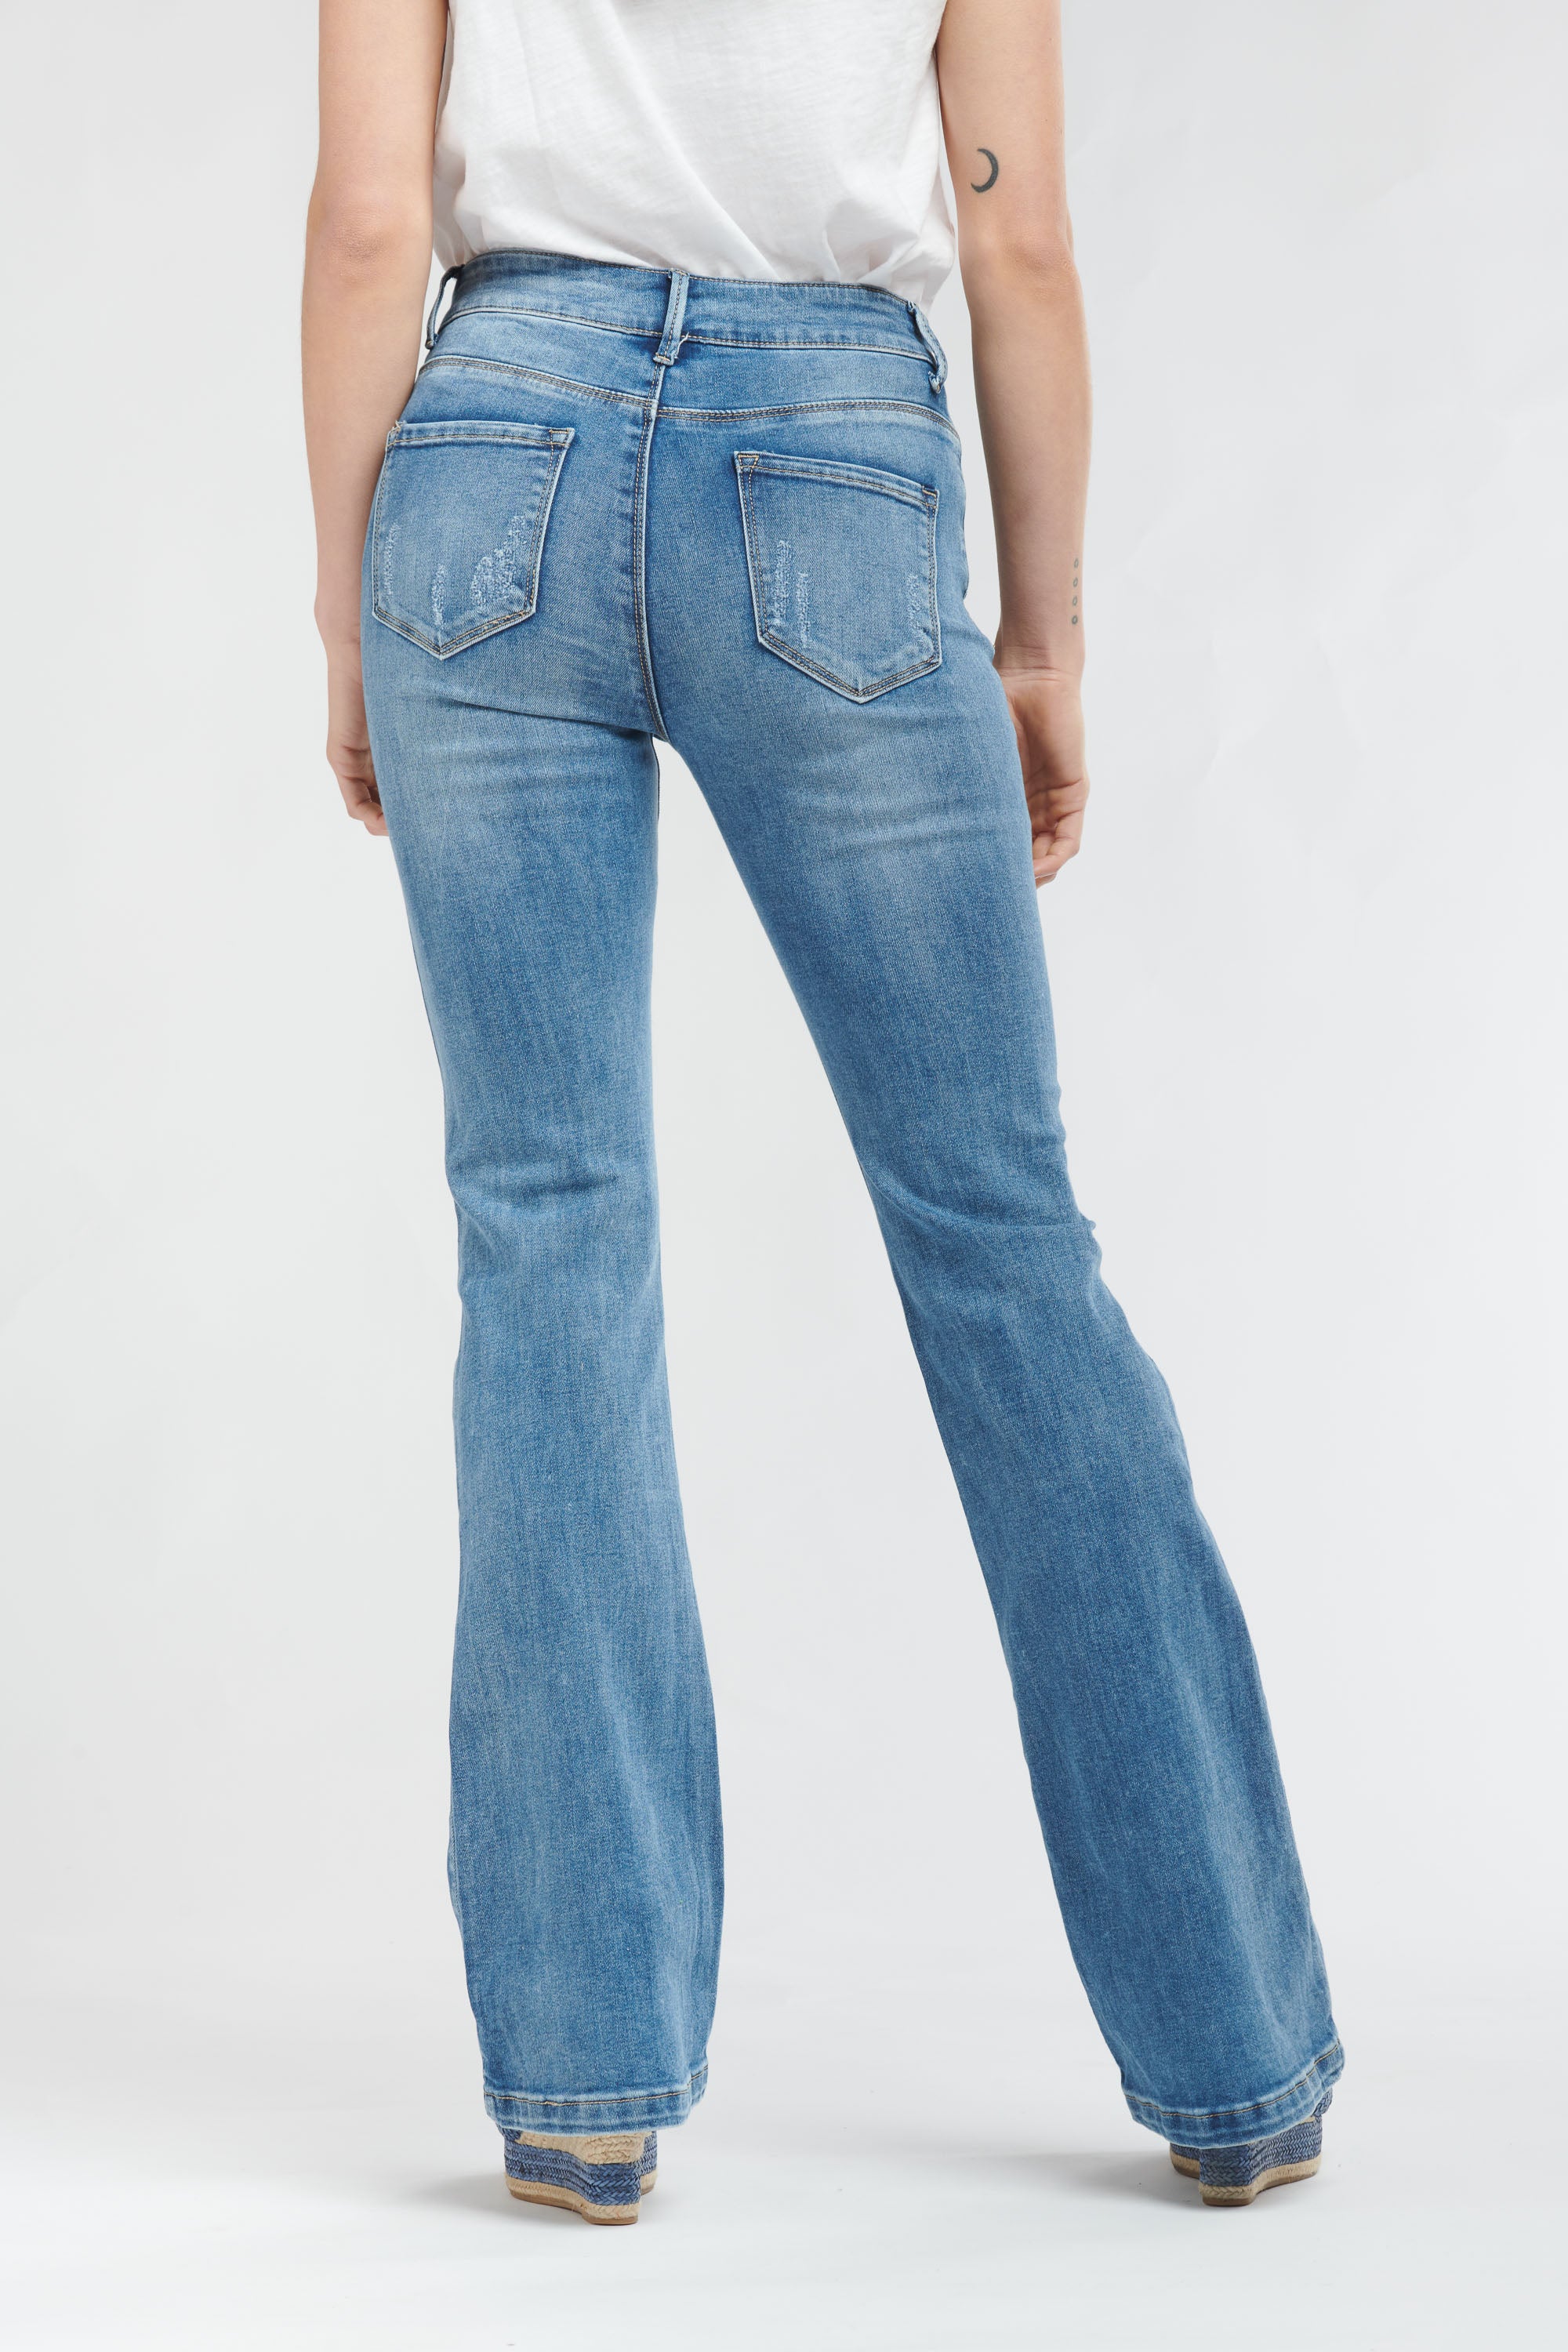 How do I measure my jeans to figure out my size in Brave Star